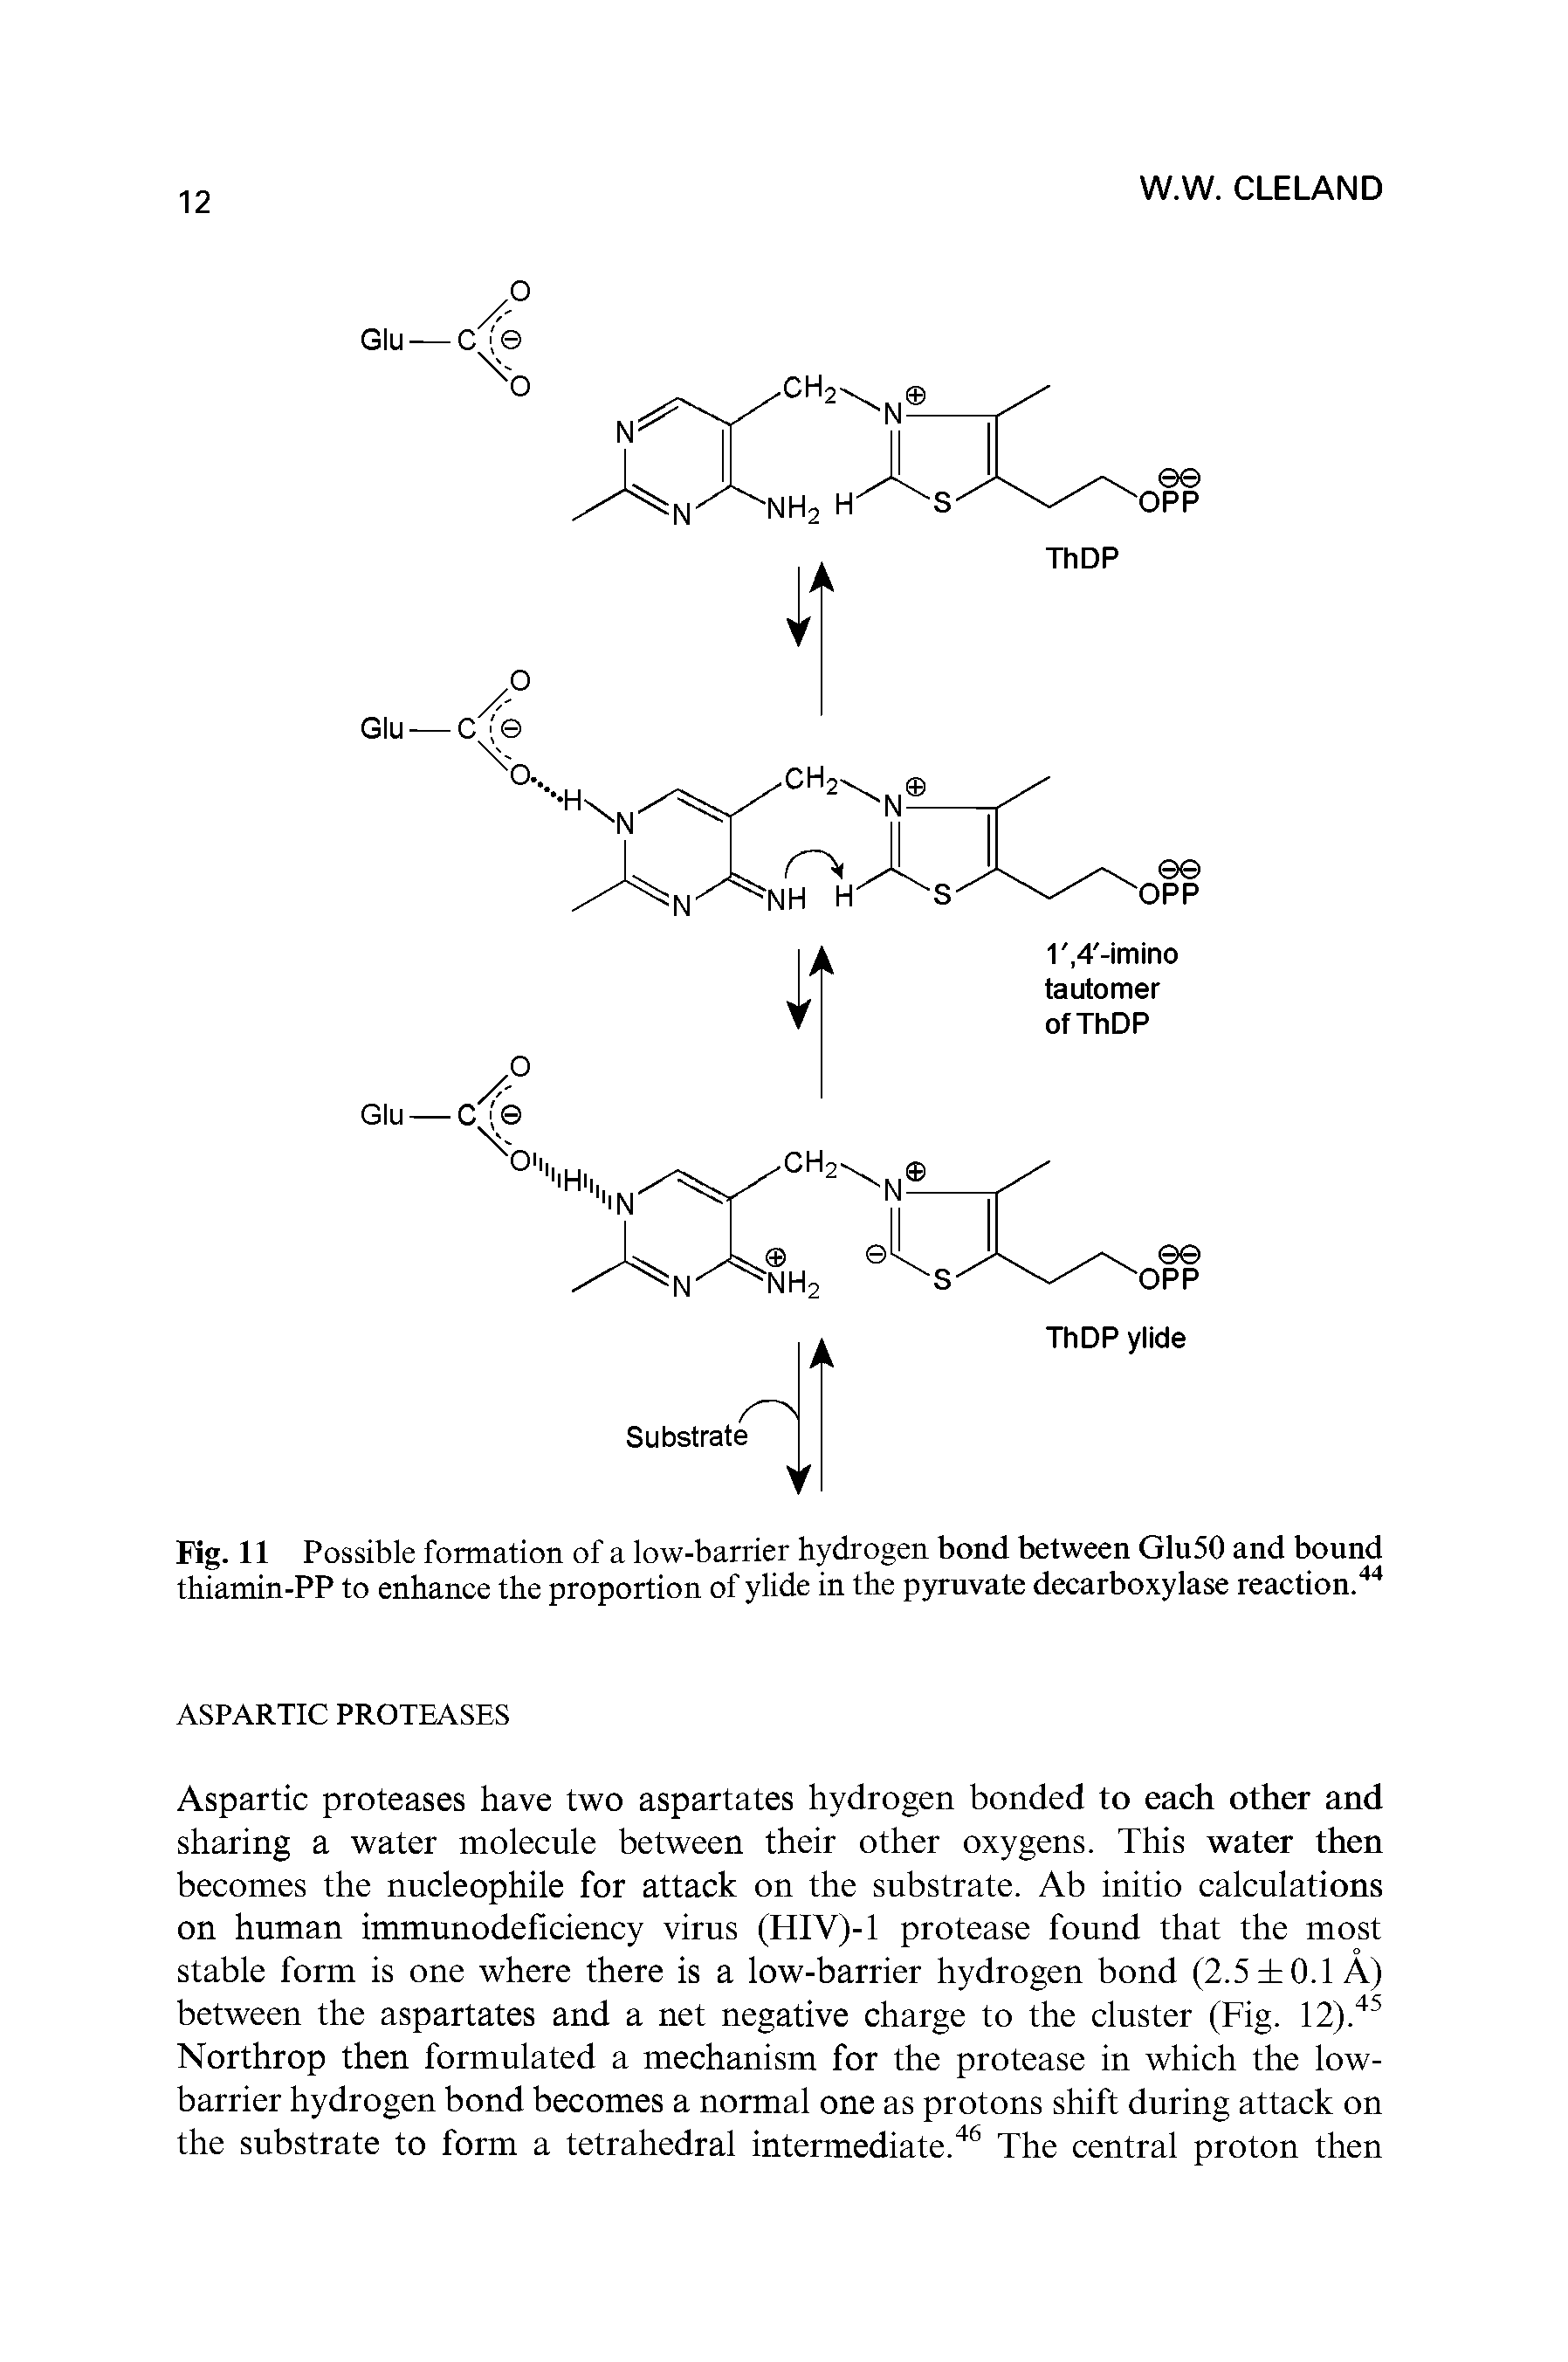 Fig. 11 Possible formation of a low-barrier hydrogen bond between Glu50 and bound thiamin-PP to enhance the proportion of ylide in the pyruvate decarboxylase reaction.44...